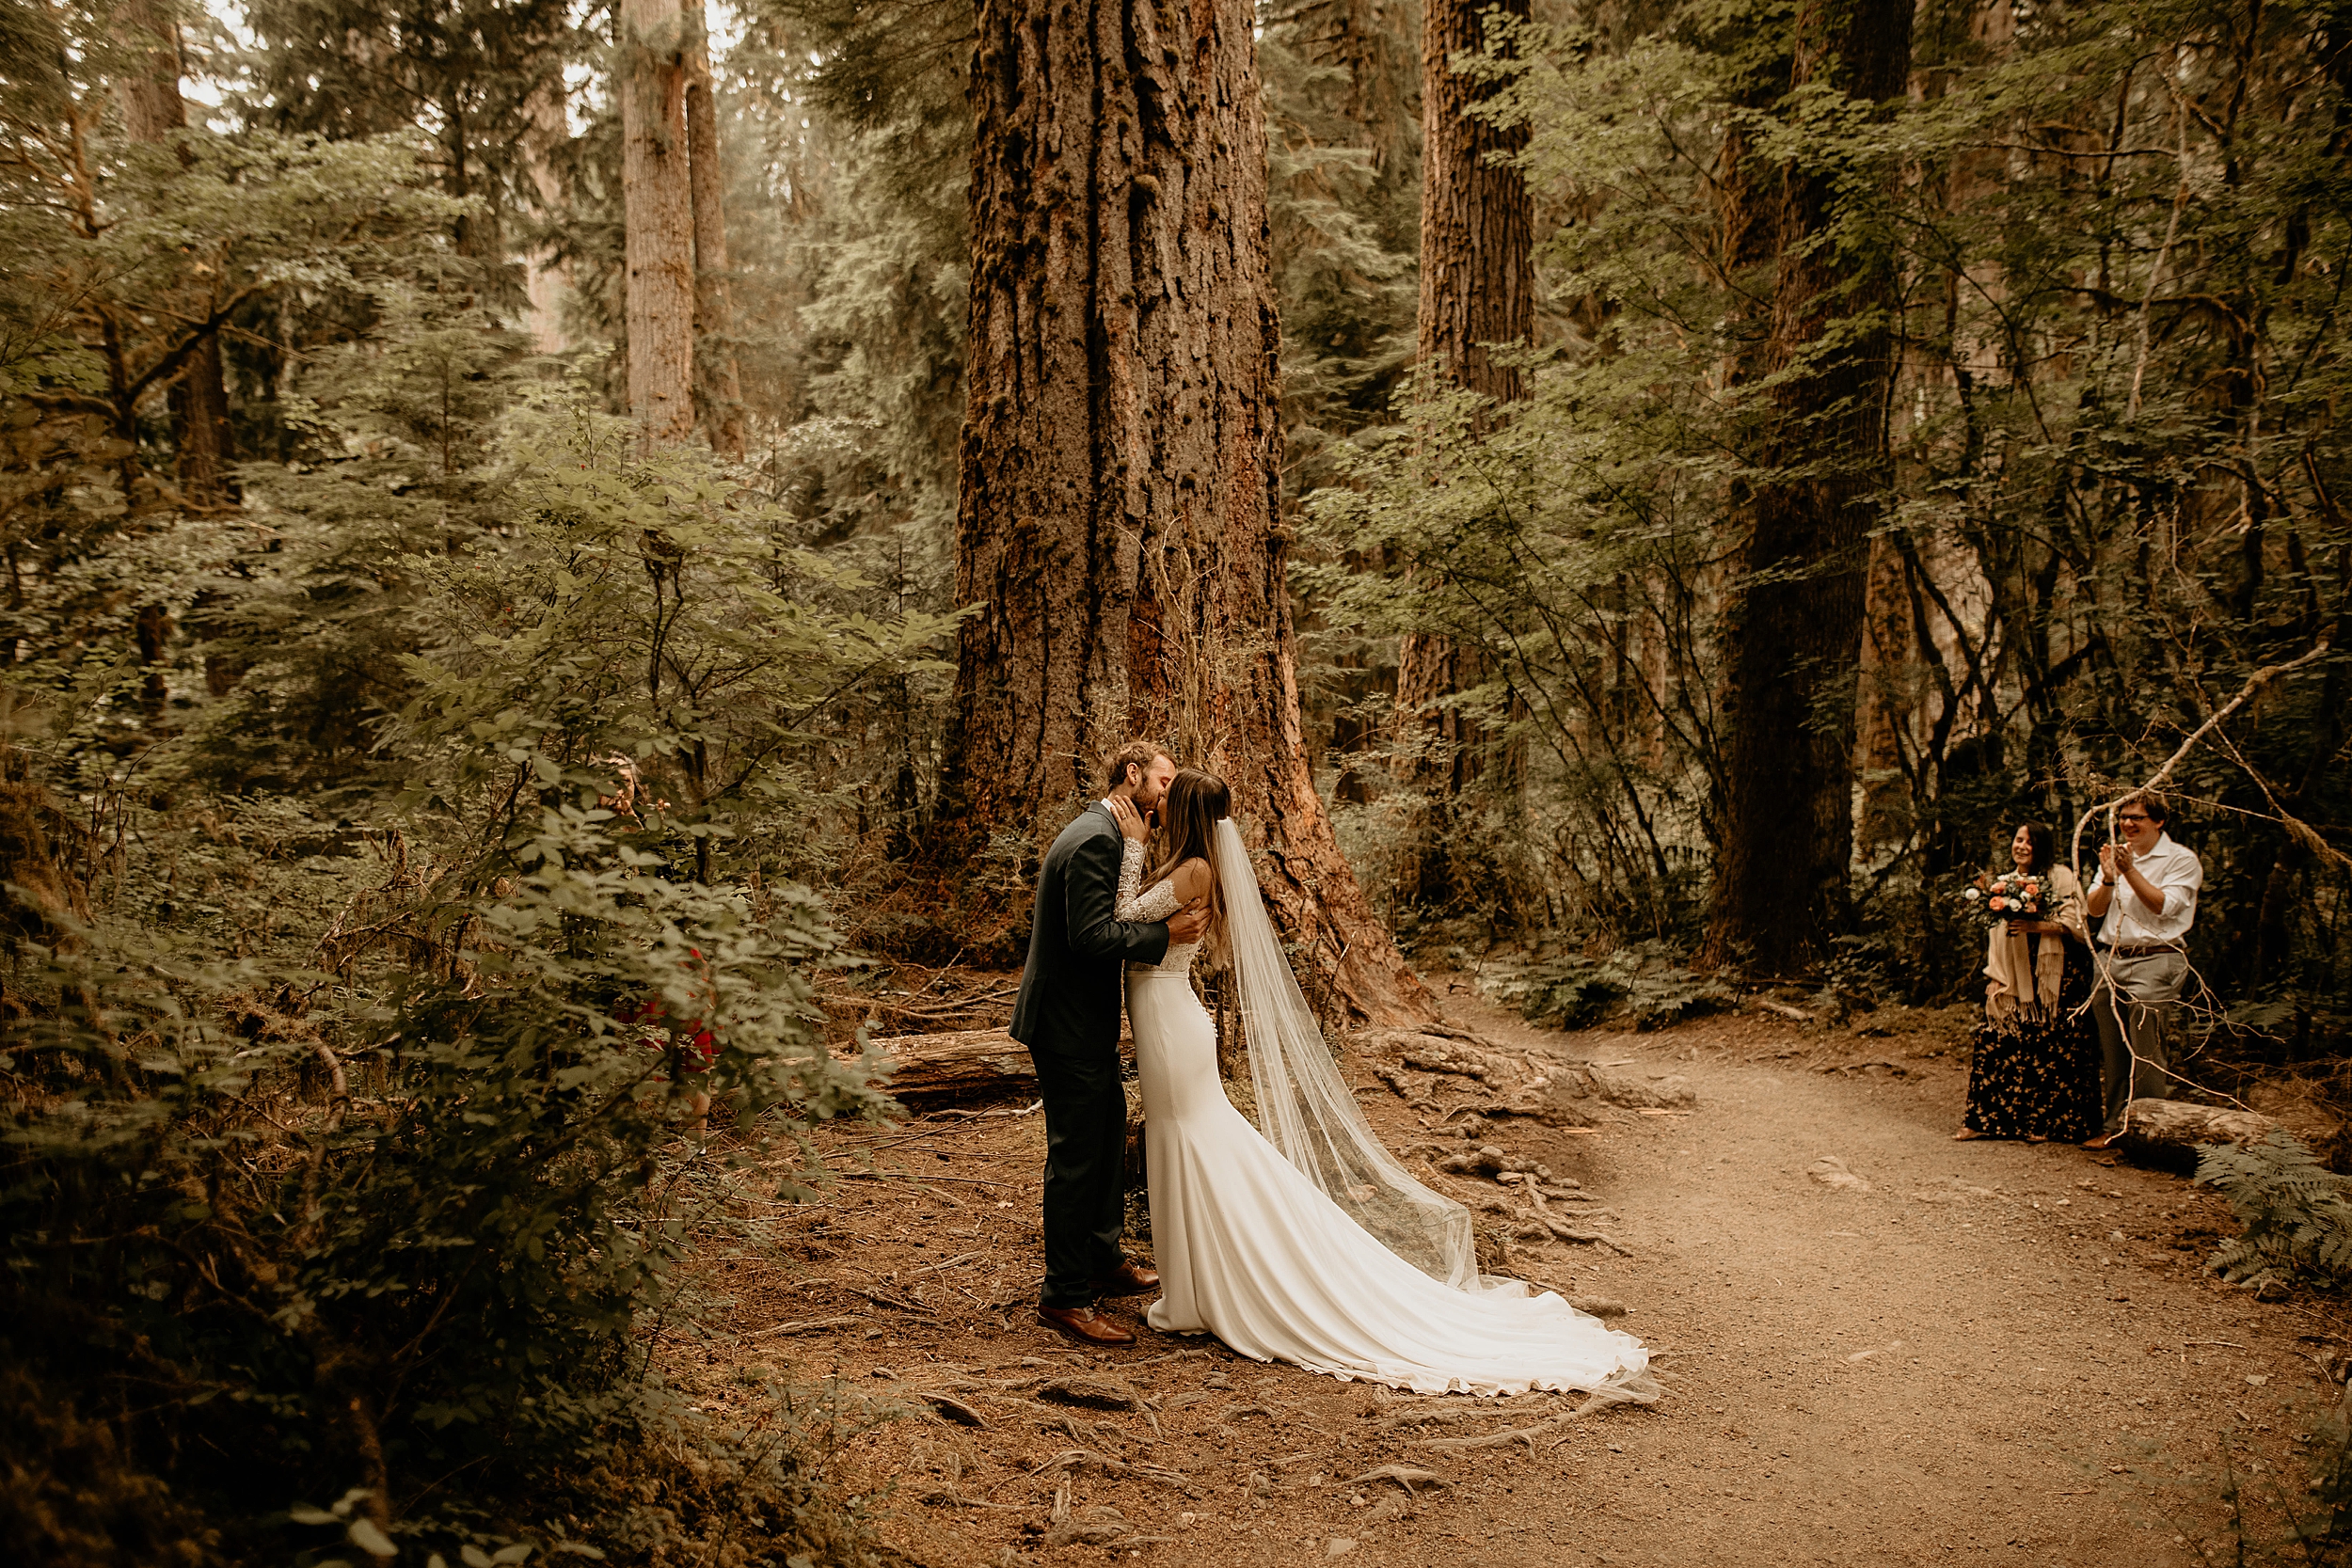 bride and groom kissing mt. hood national forest

